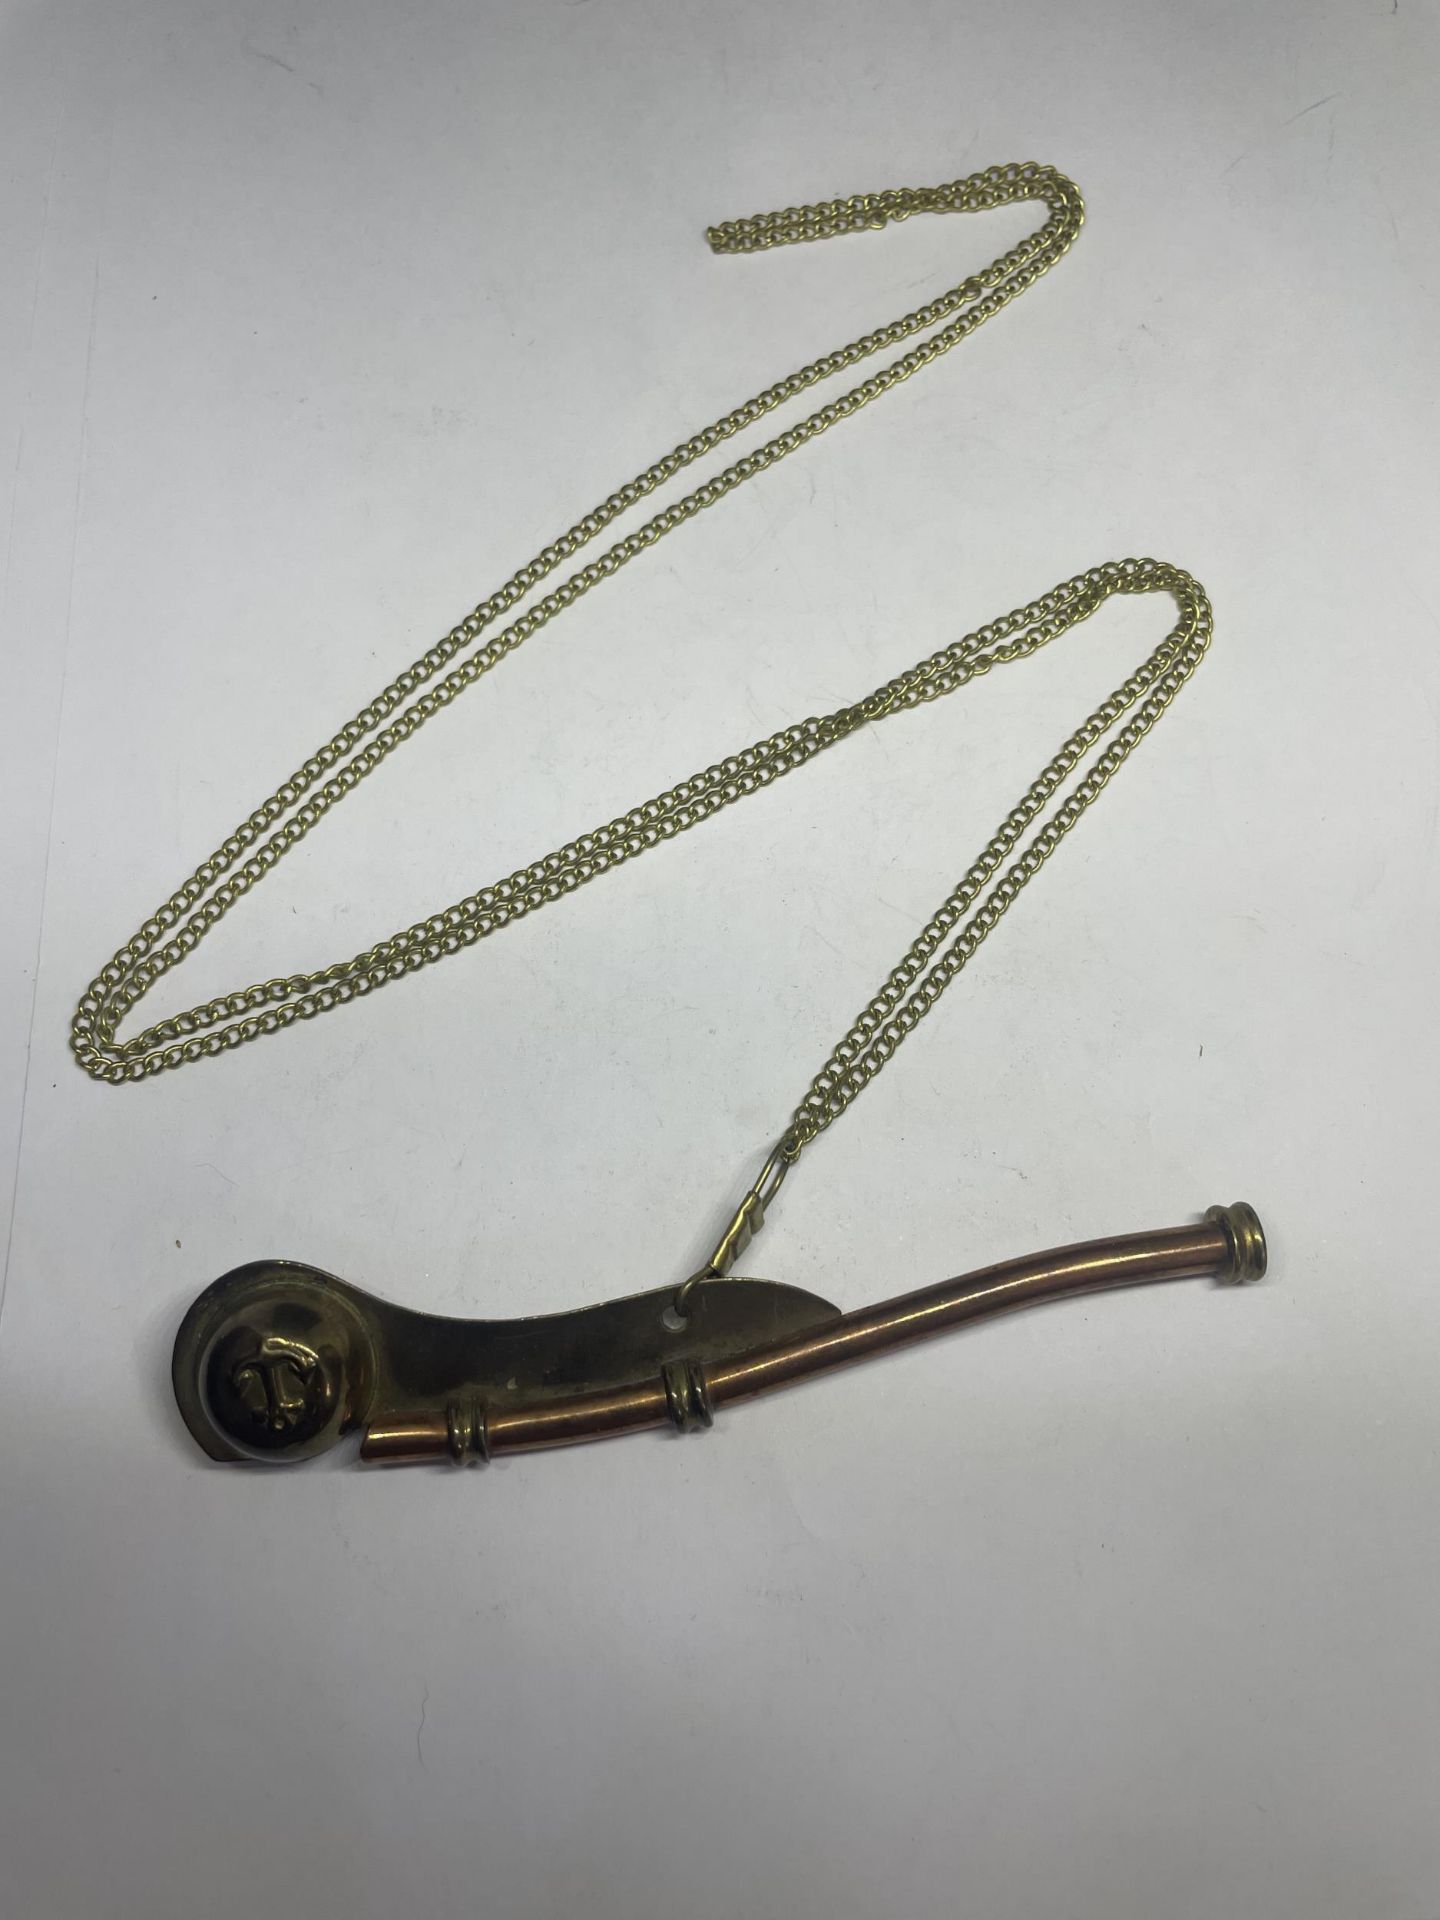 A BOSSONS WHISTLE AND CHAIN